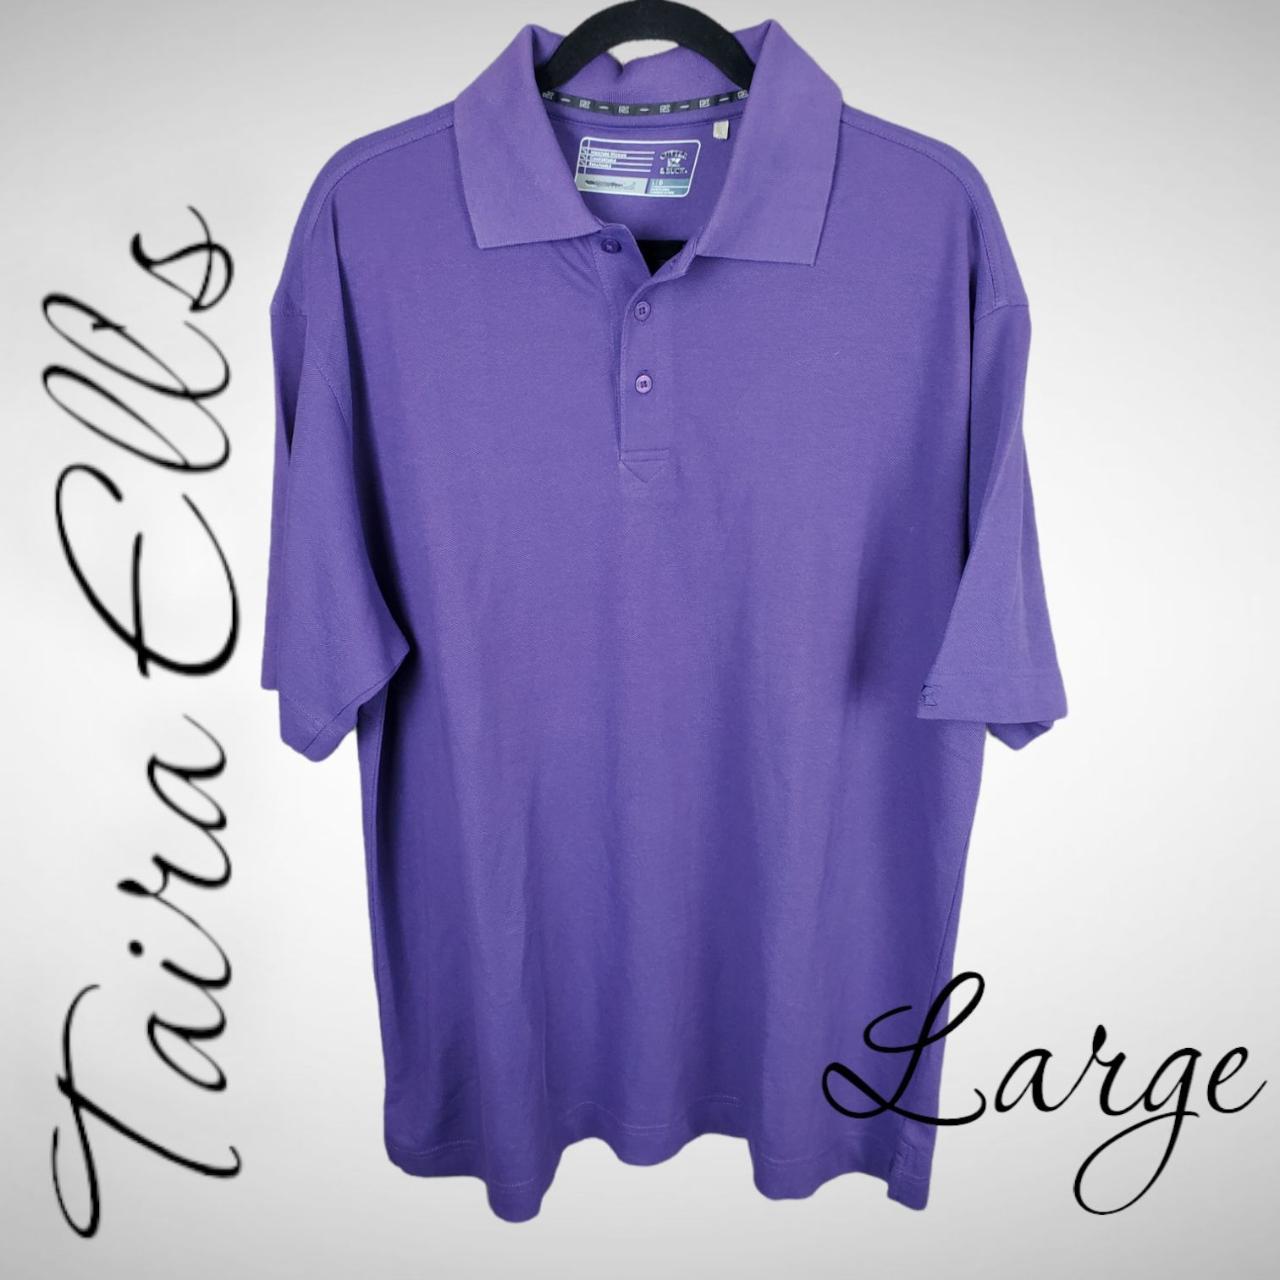 Product Image 1 - Lg Cutter & Buck Polo
Brand: